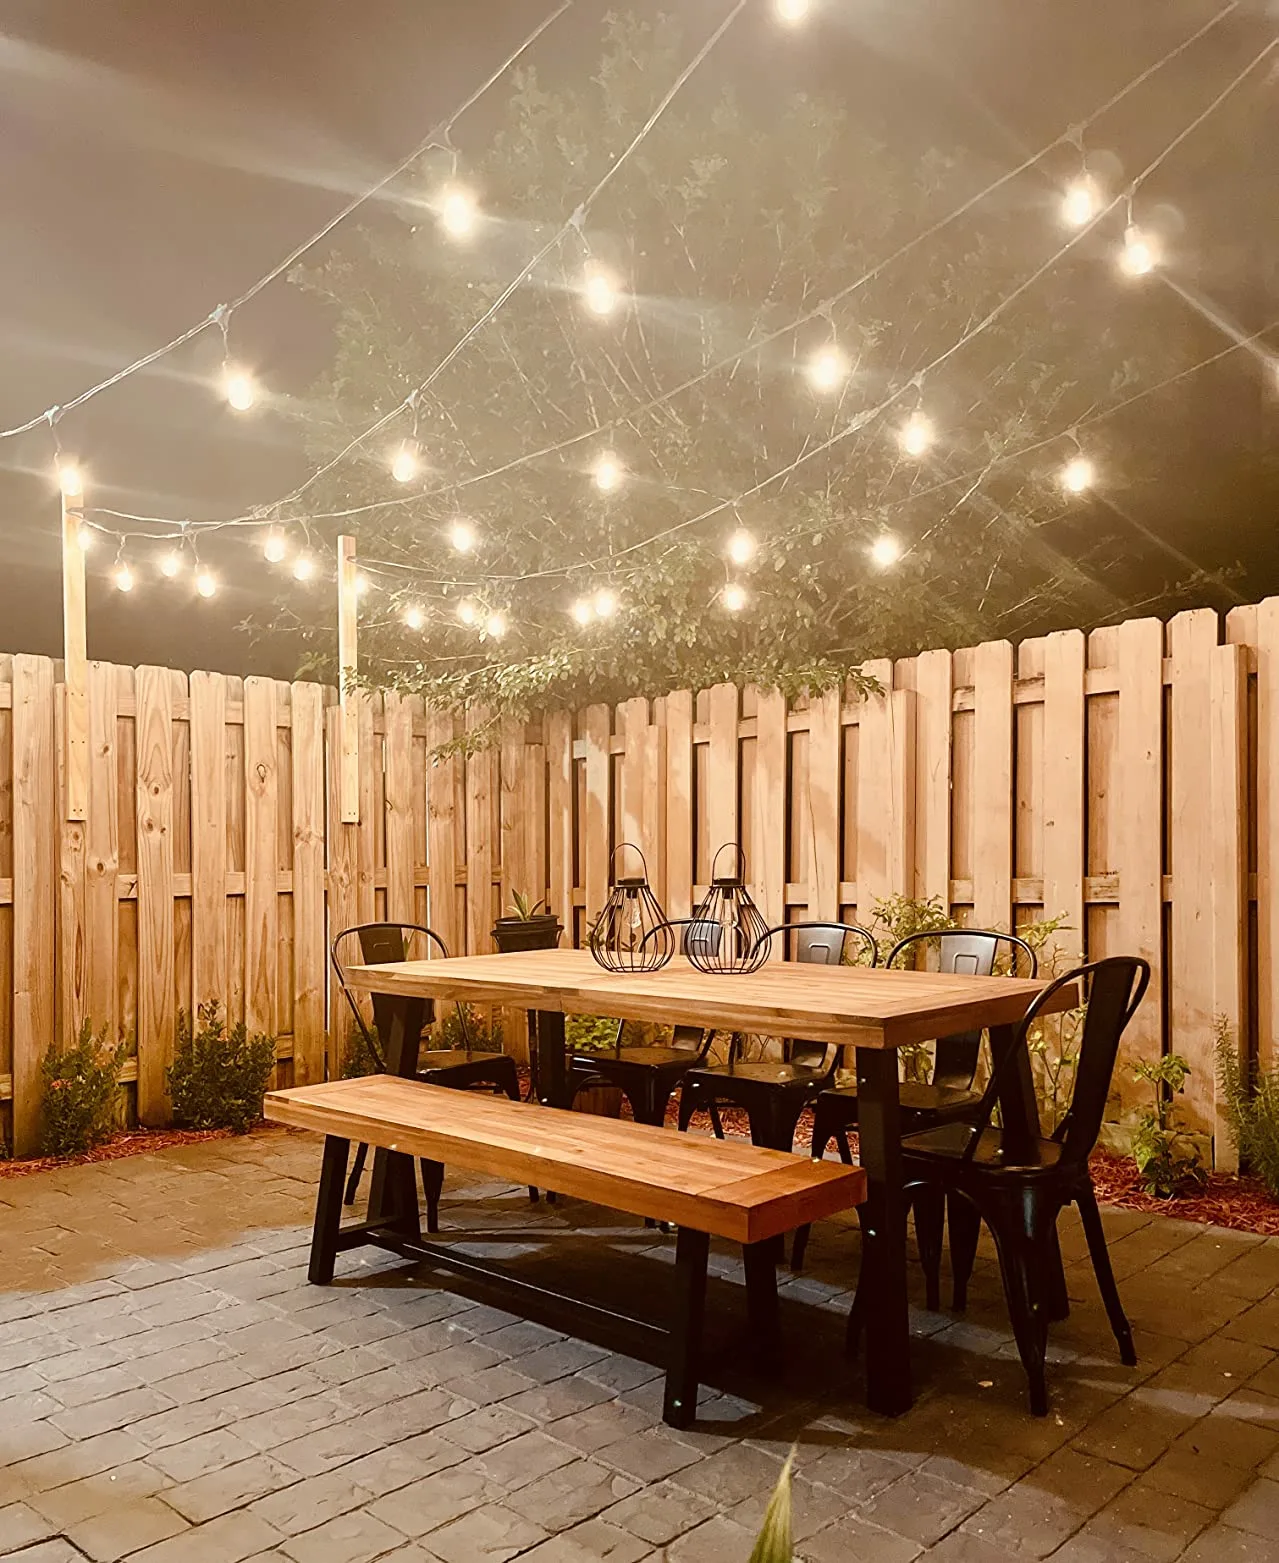 Brown Table Wooden Rectangle Black Chairs Warm Stringlights Wooden Backyard Fence Angle View Custom Made Dining Tables